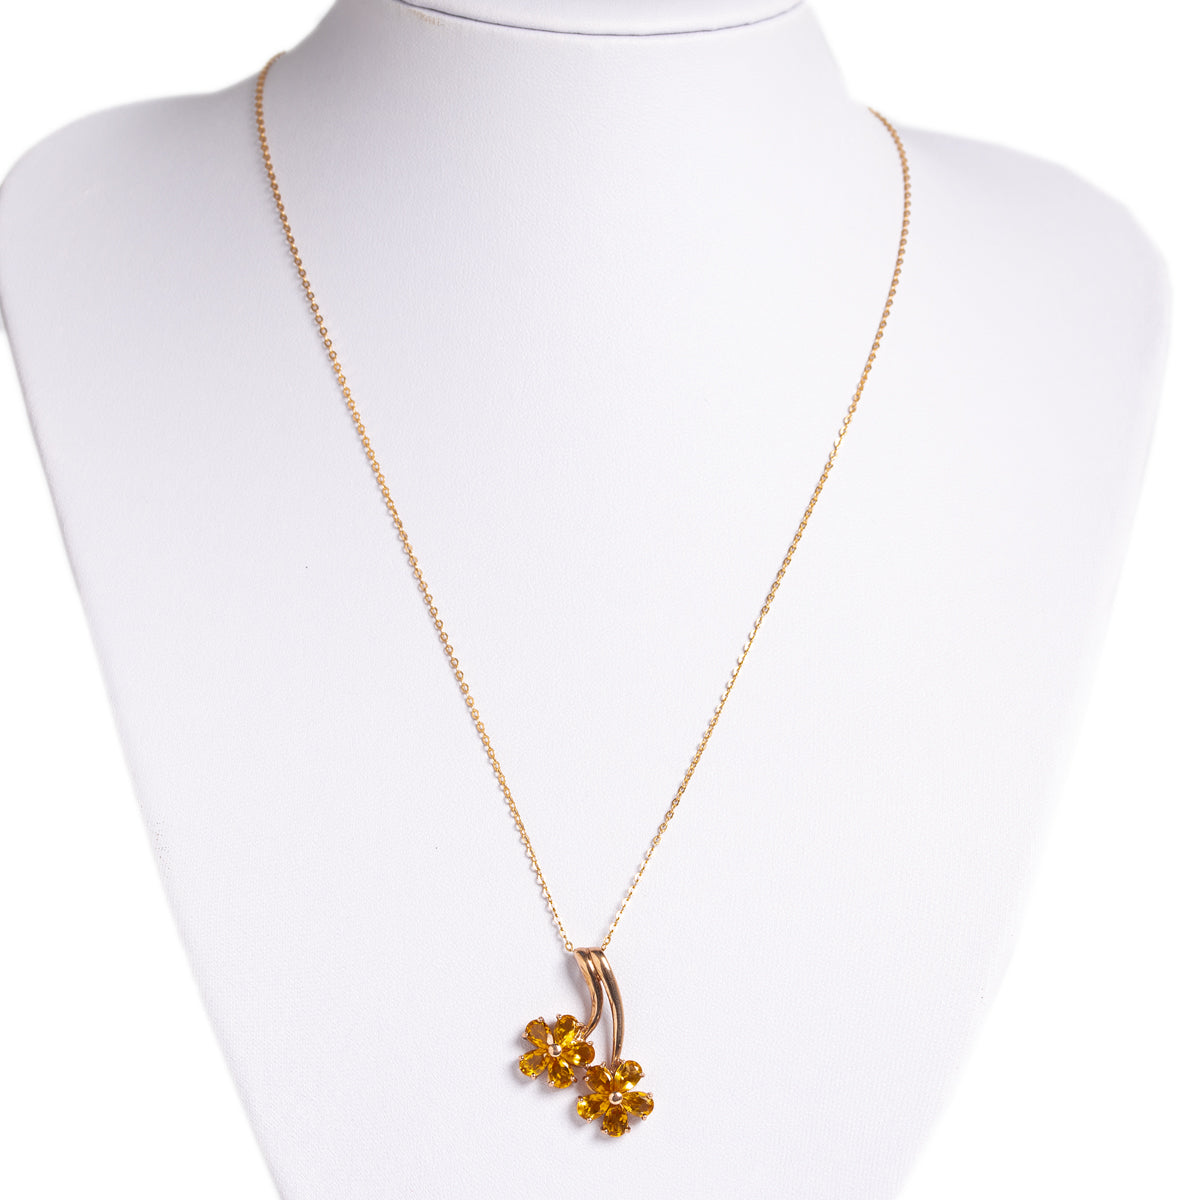 Citrine Flowers With Stems Design Pendant 9ct Gold With Fine 14K Gold Chain  (A1389)